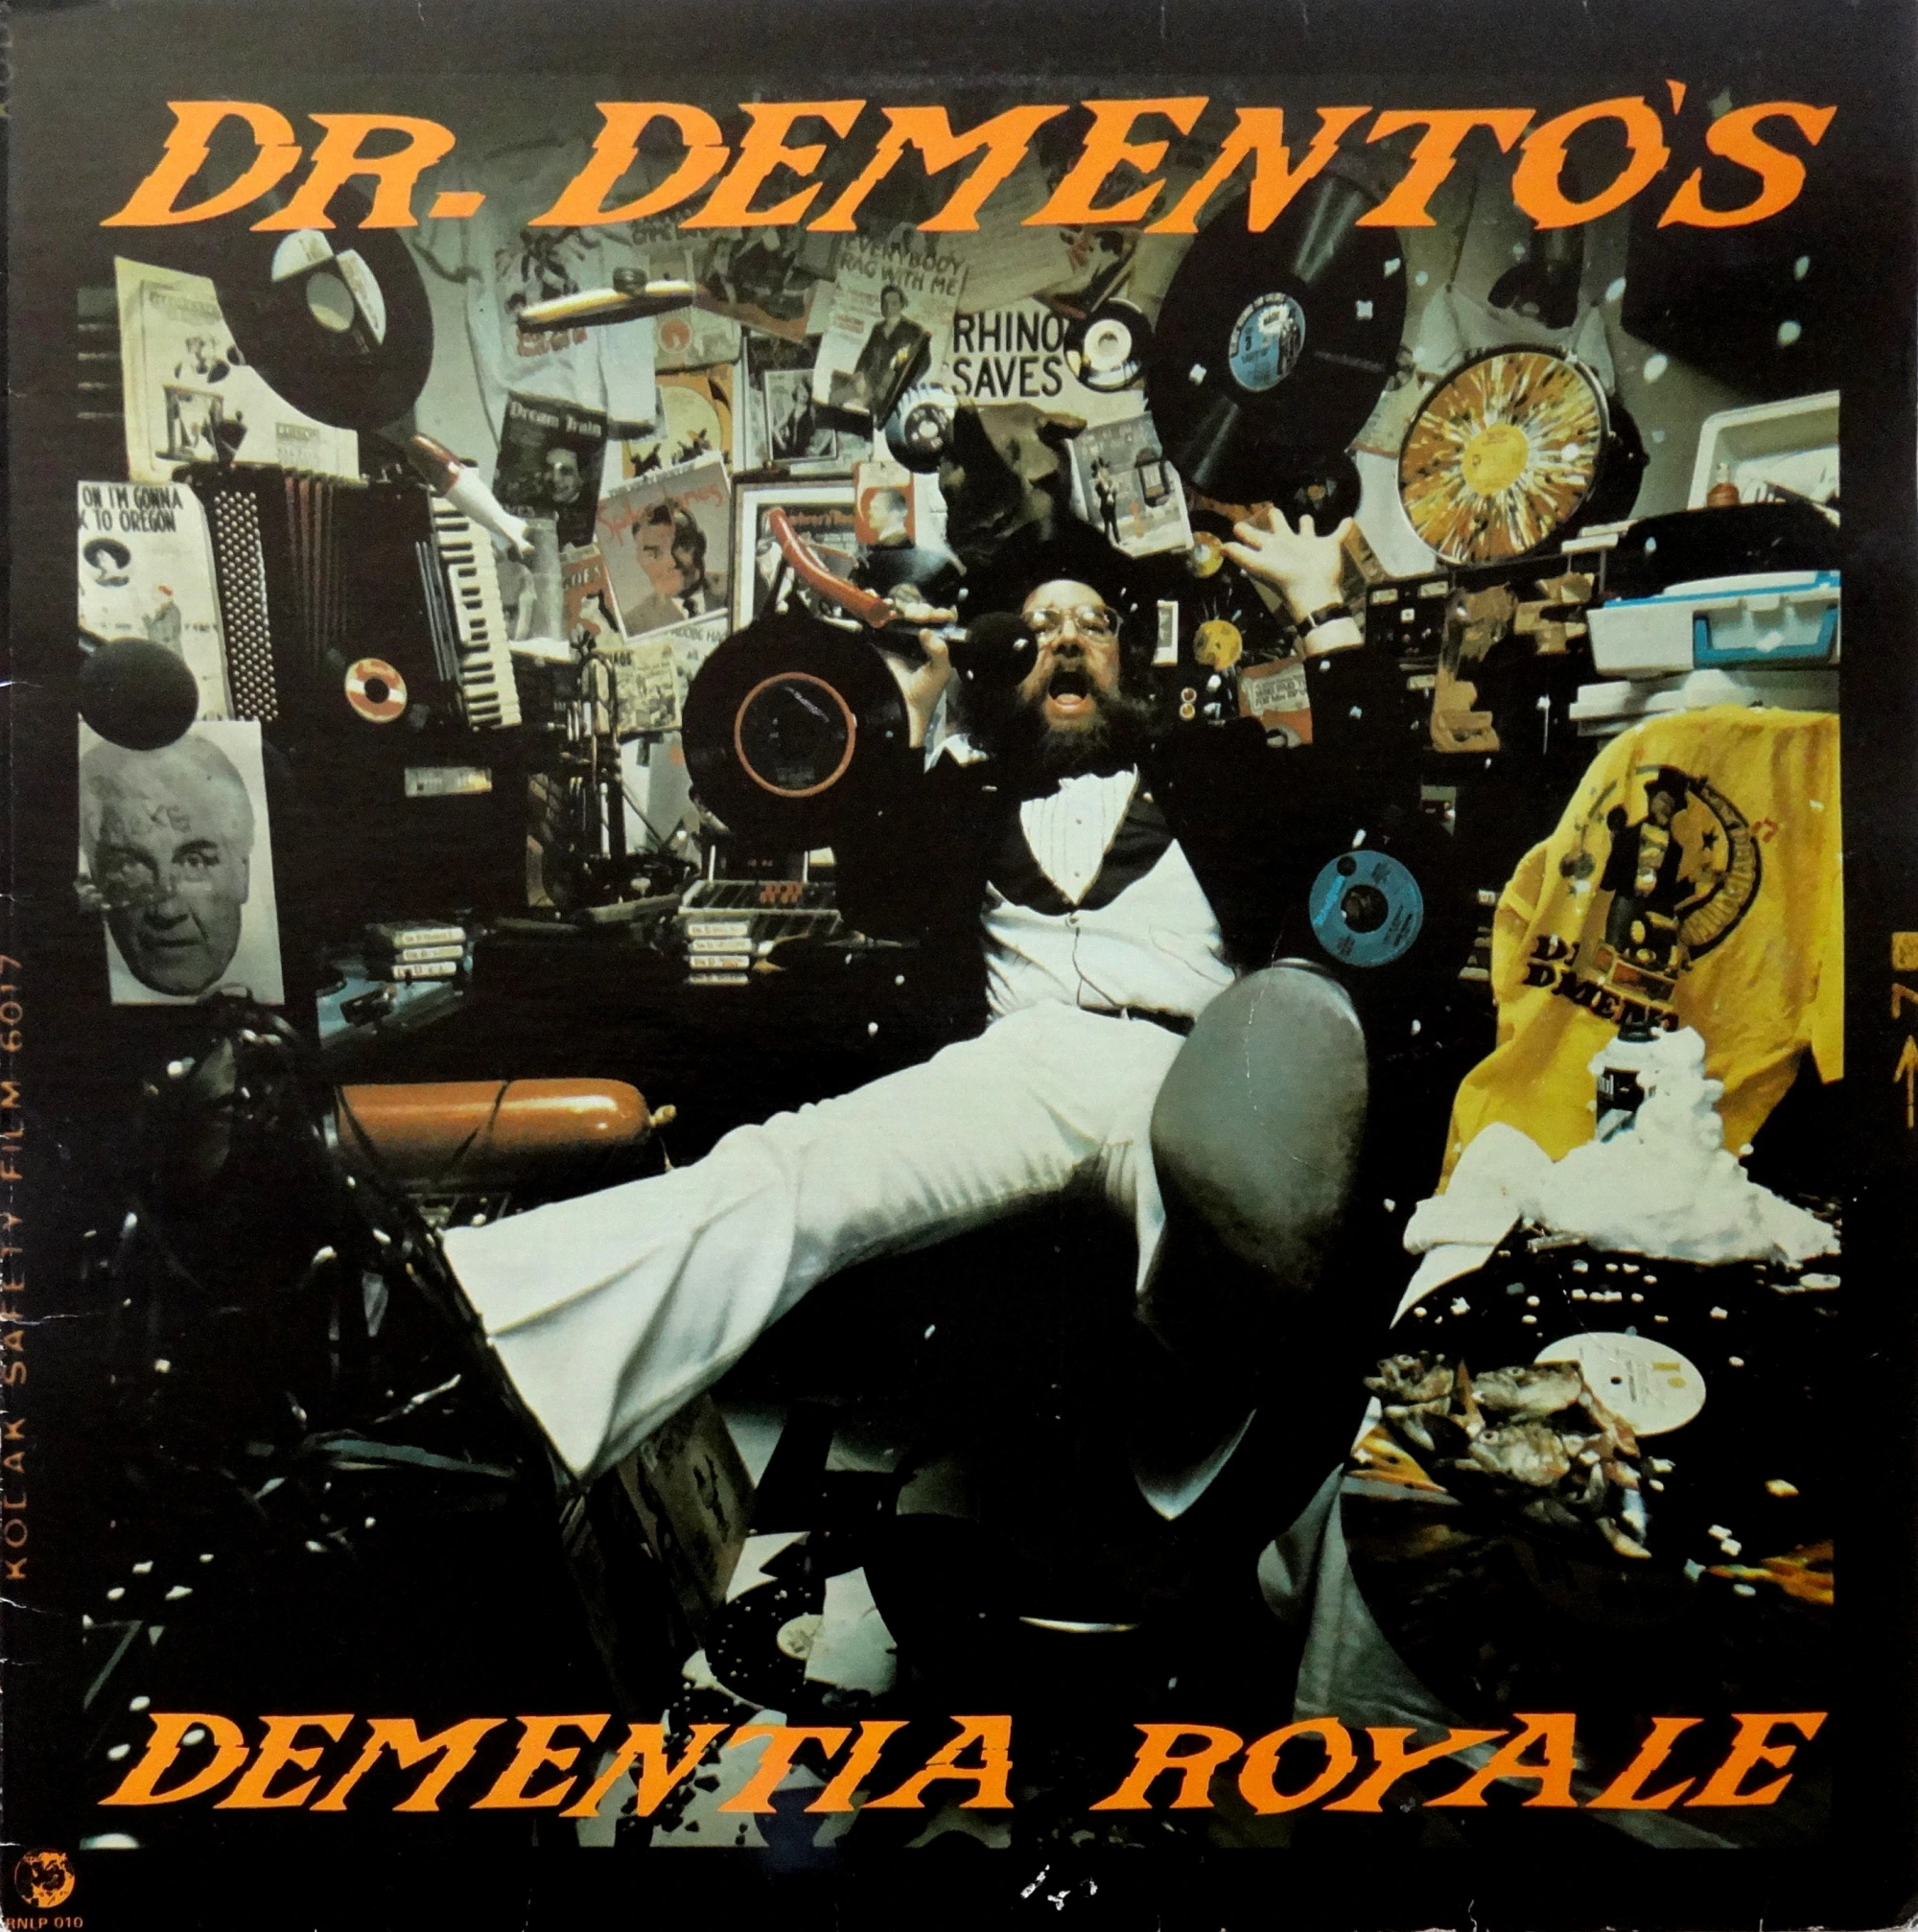 Cover art of Dr Demento's Dementia Royale